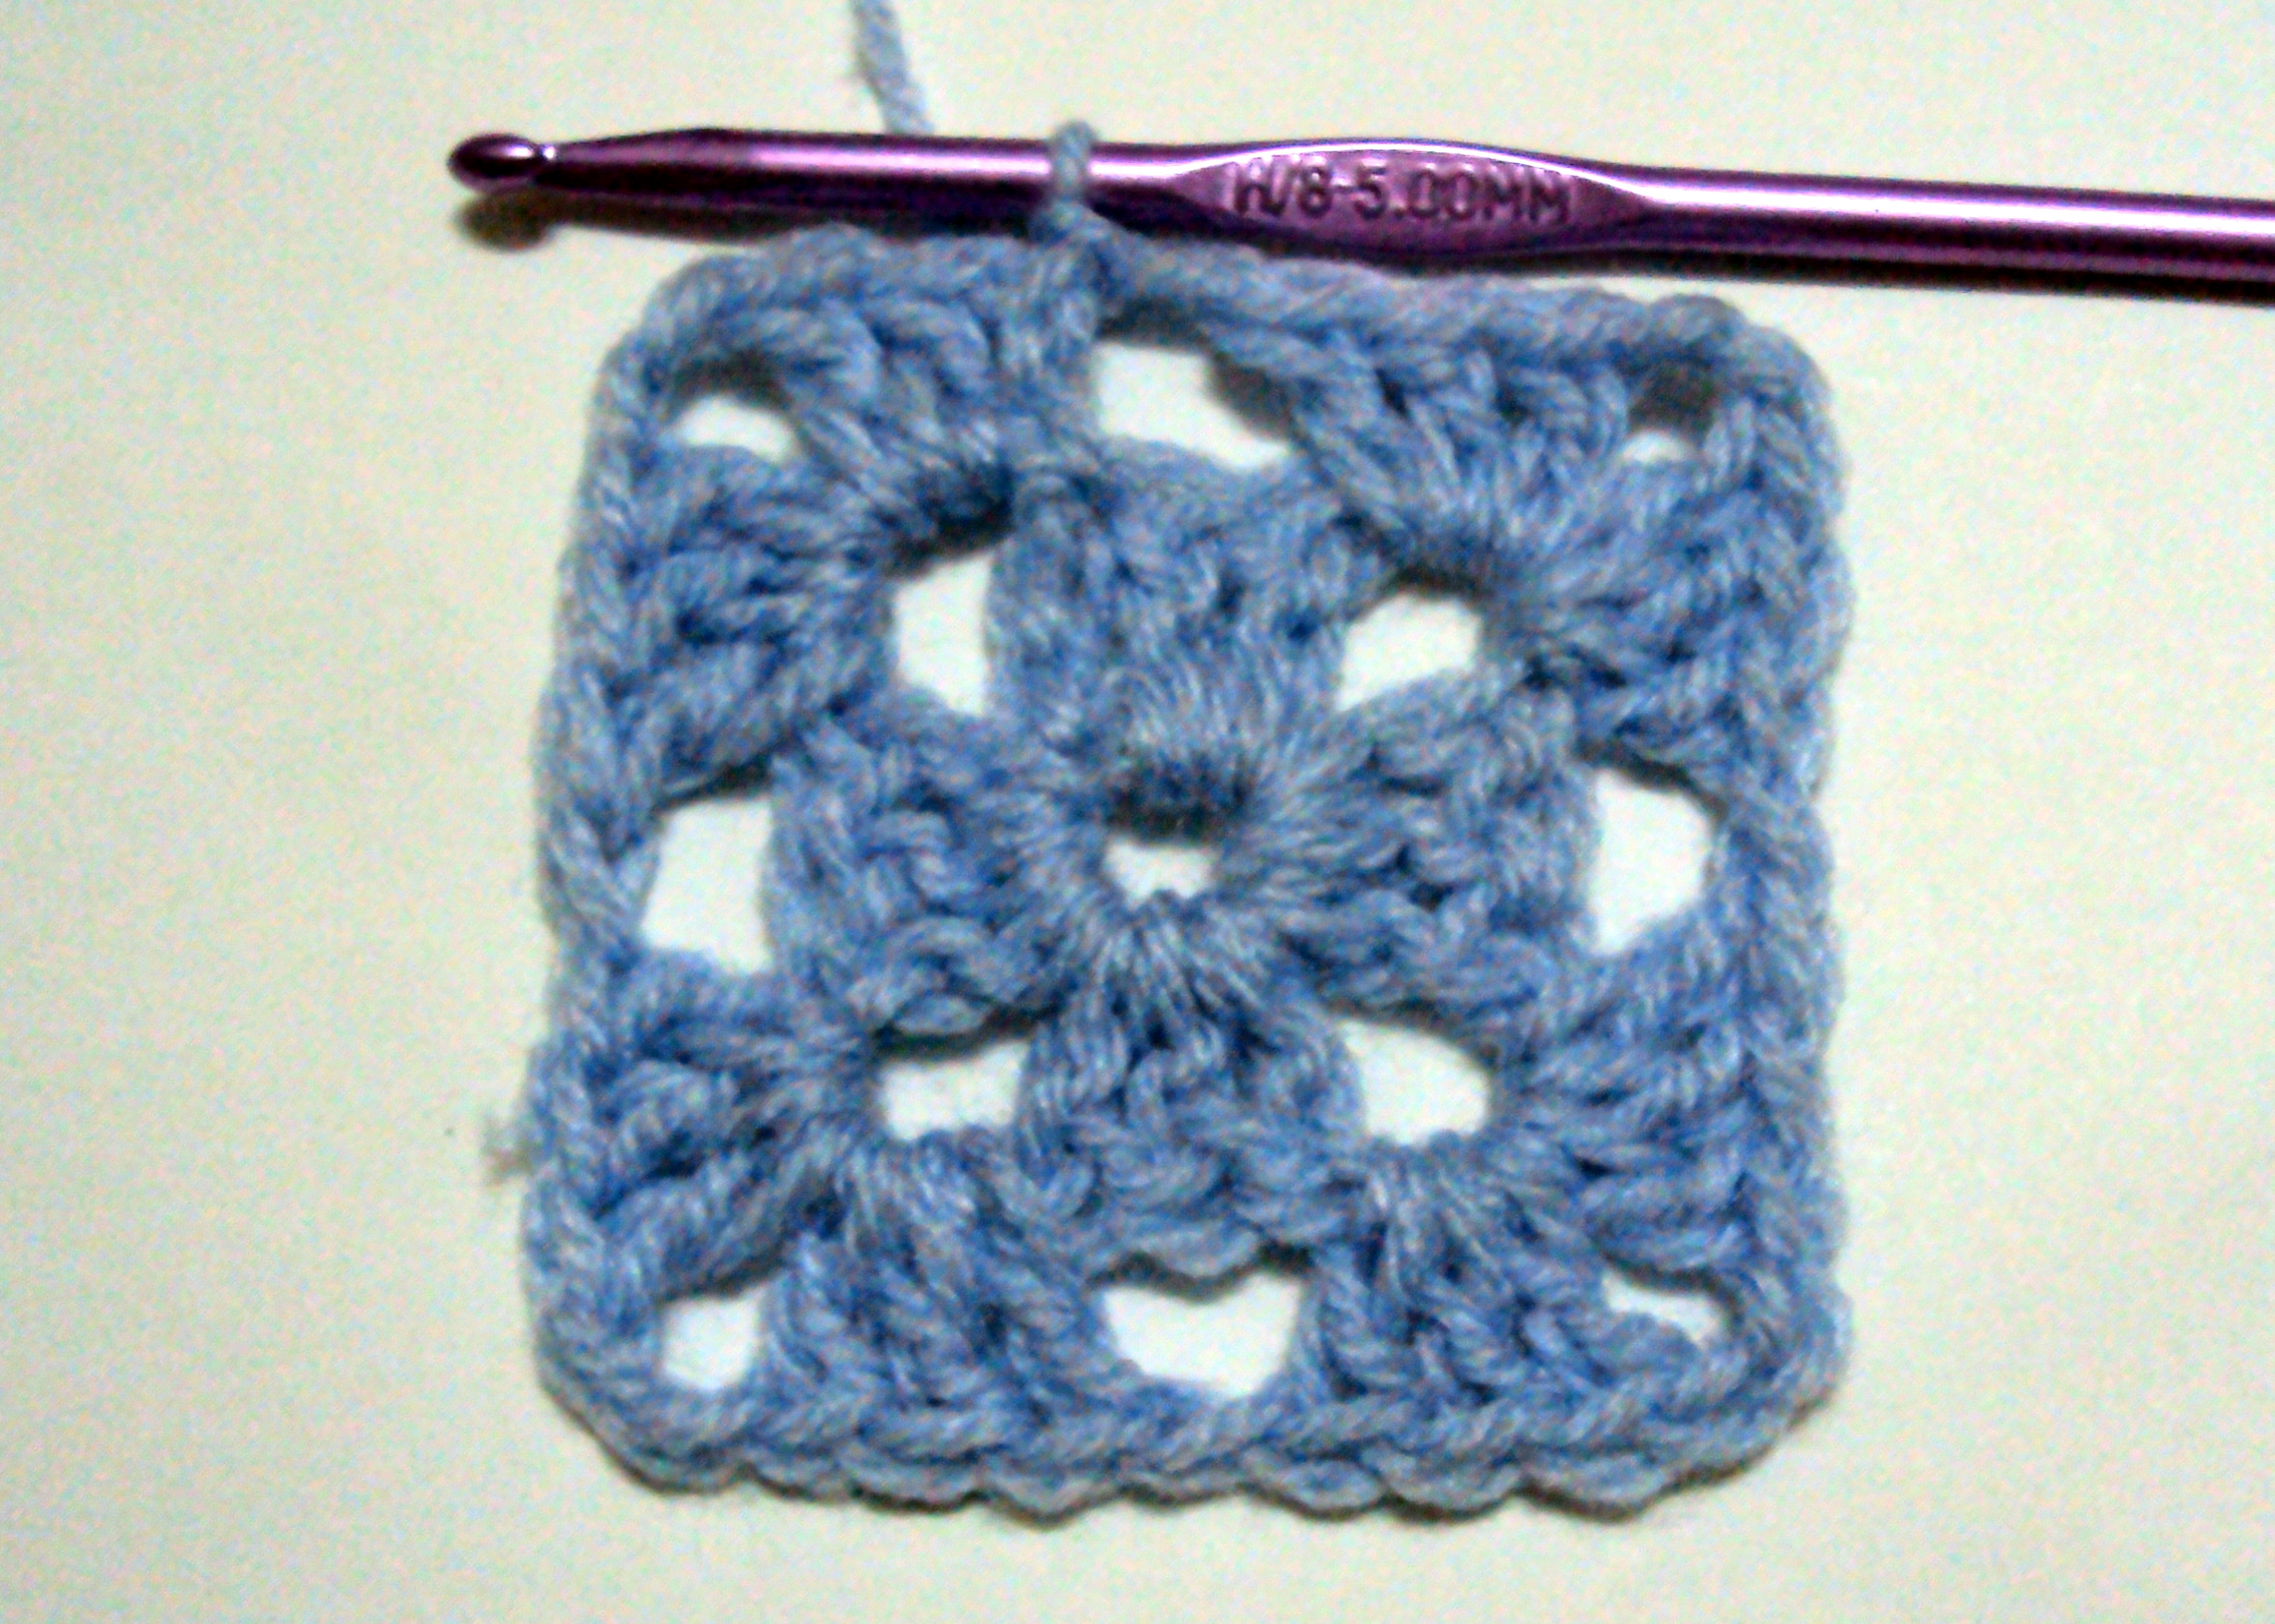 4 Ways to Attach Granny Squares - wikiHow